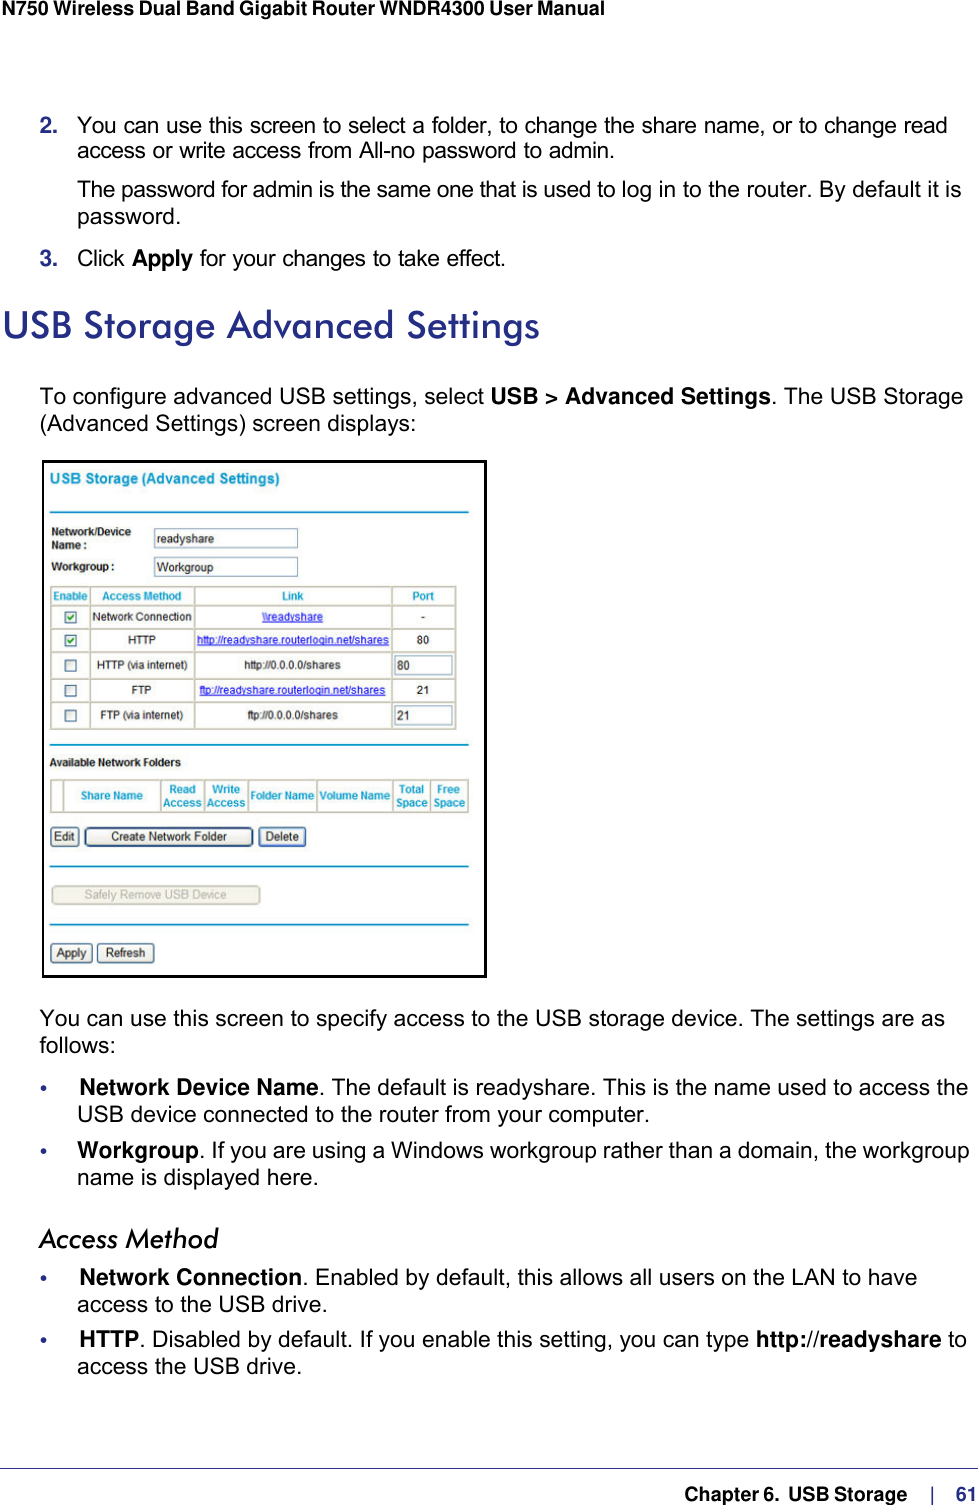   Chapter 6.  USB Storage     |    61N750 Wireless Dual Band Gigabit Router WNDR4300 User Manual 2.  You can use this screen to select a folder, to change the share name, or to change read access or write access from All-no password to admin. The password for admin is the same one that is used to log in to the router. By default it is password.3.  Click Apply for your changes to take effect.USB Storage Advanced SettingsTo configure advanced USB settings, select USB &gt; Advanced Settings. The USB Storage (Advanced Settings) screen displays:You can use this screen to specify access to the USB storage device. The settings are as follows:•     Network Device Name. The default is readyshare. This is the name used to access the USB device connected to the router from your computer.•     Workgroup. If you are using a Windows workgroup rather than a domain, the workgroup name is displayed here.Access Method•     Network Connection. Enabled by default, this allows all users on the LAN to have access to the USB drive.•     HTTP. Disabled by default. If you enable this setting, you can type http://readyshare to access the USB drive.